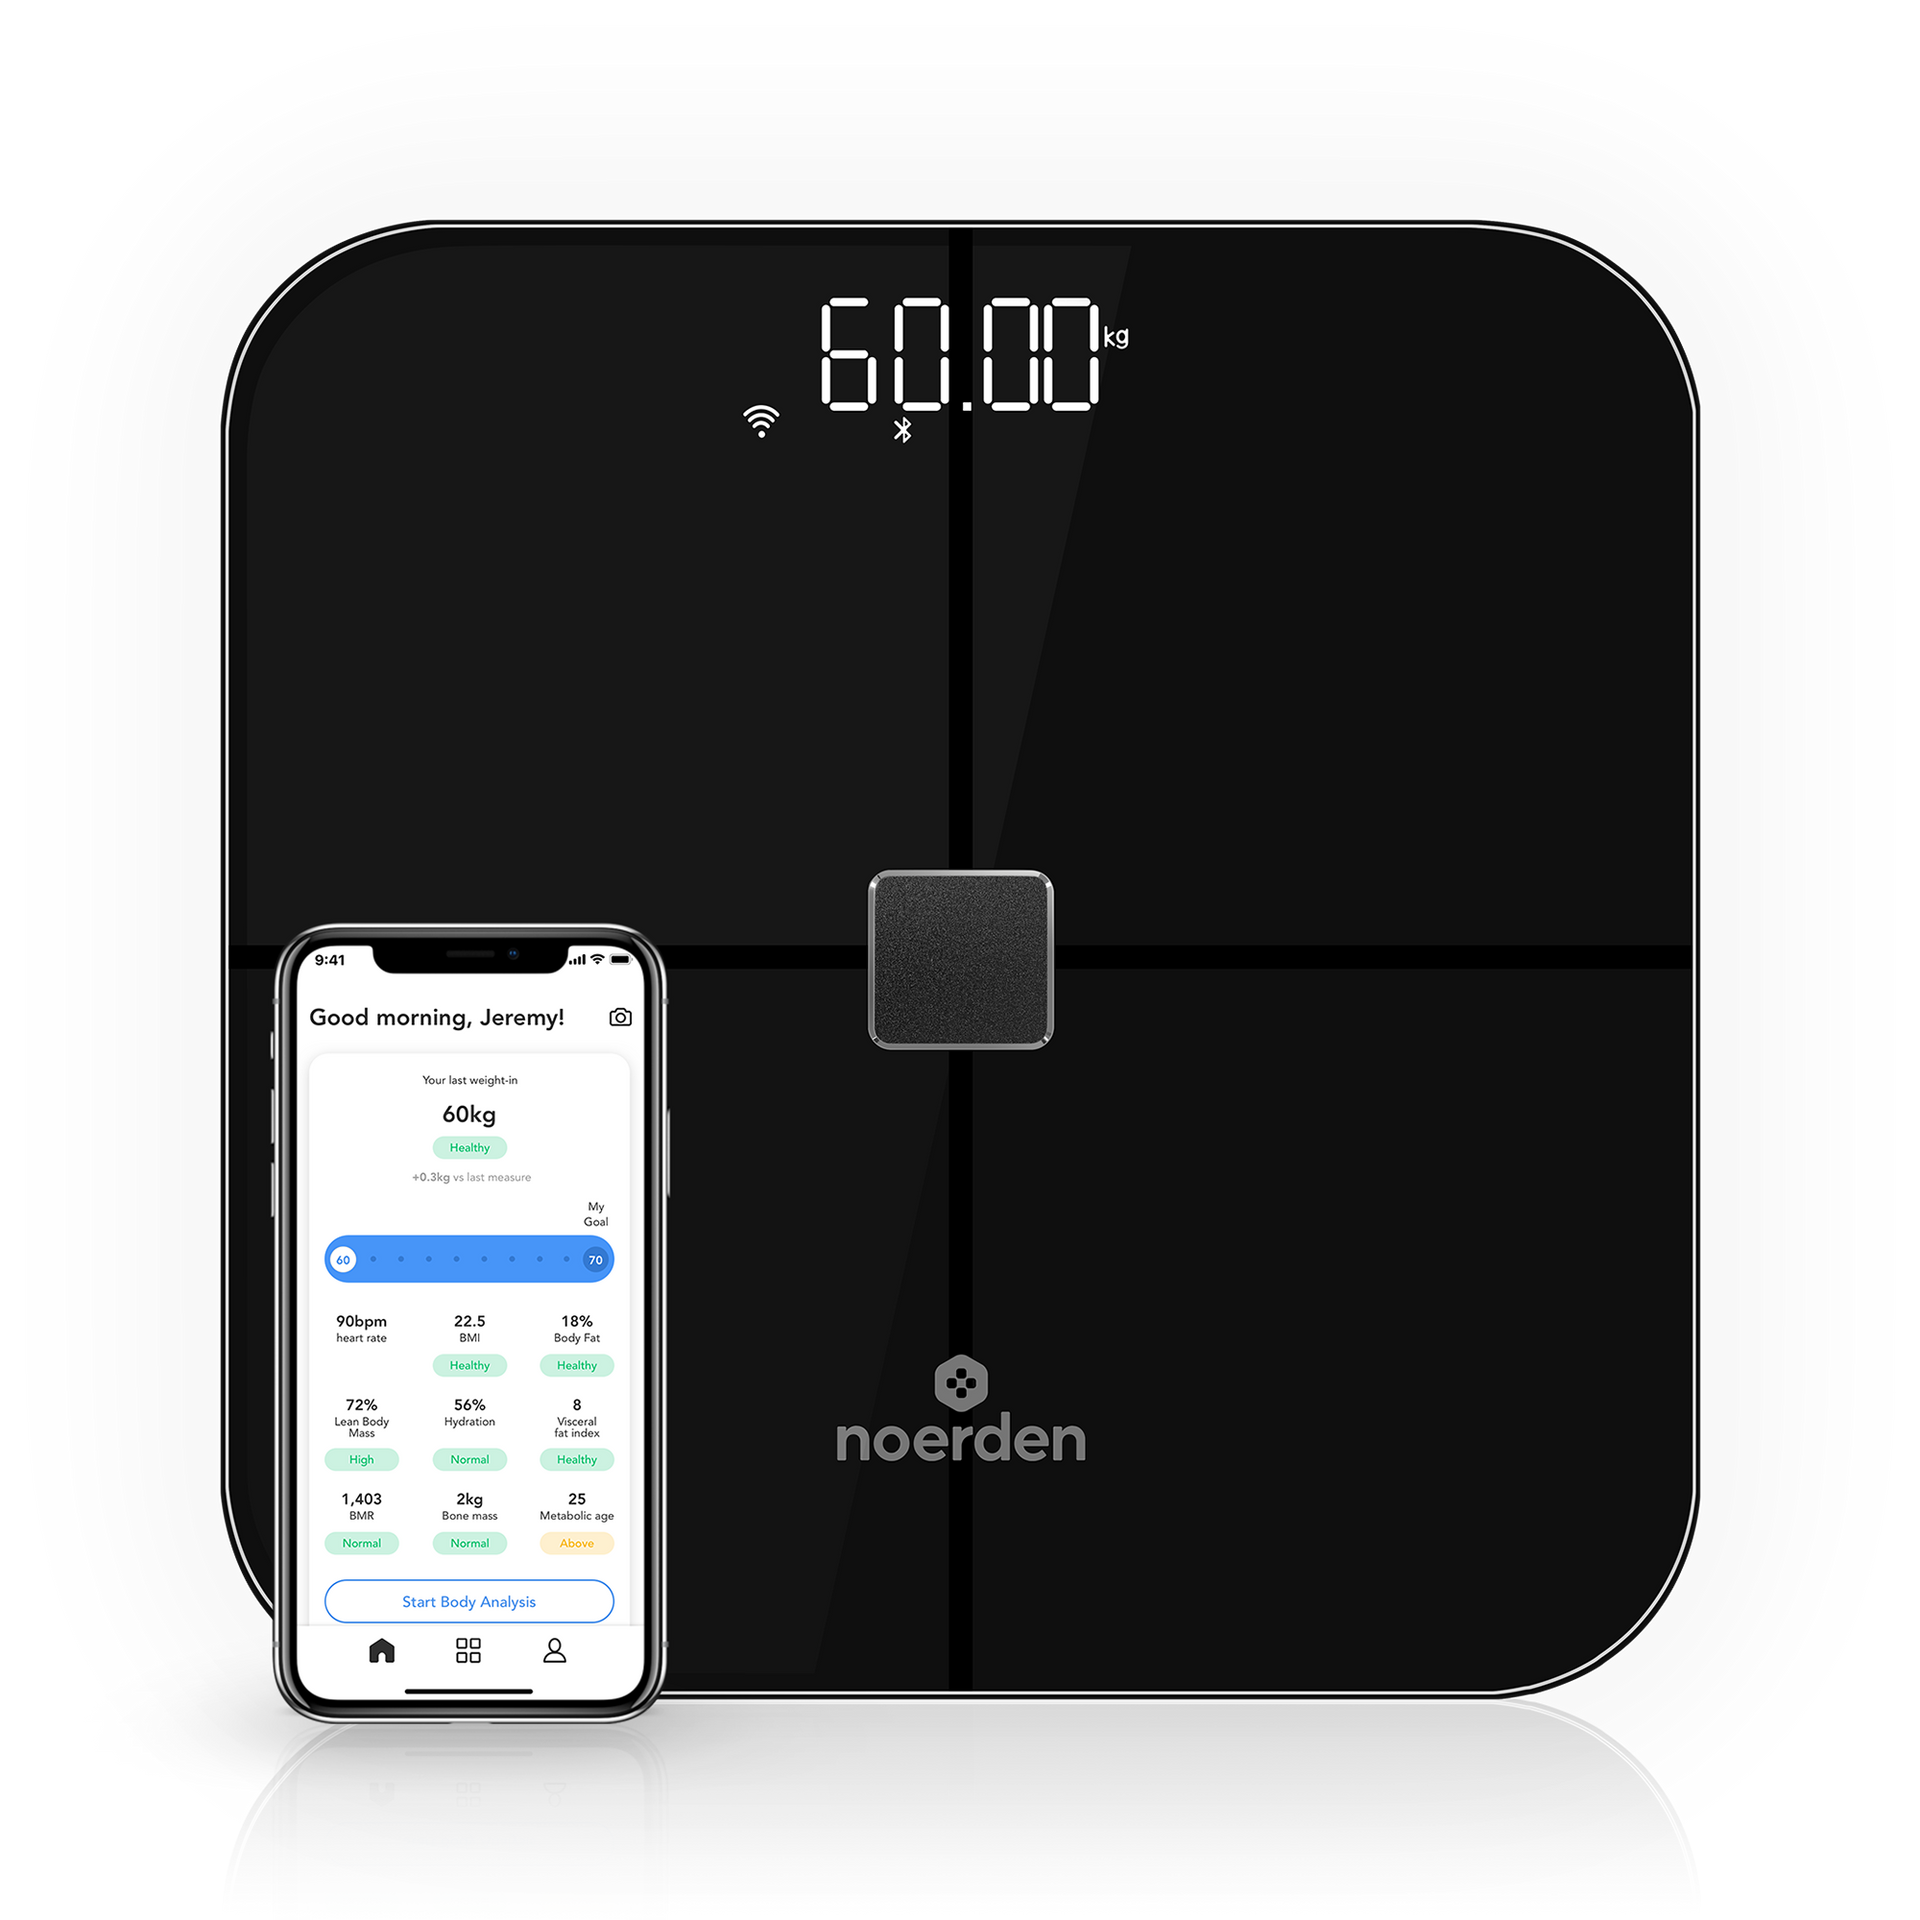 MOBI Connect Smart BMI Wi-Fi Total Body Composition Scale with App  Analysis, Wireless Weight Scale, Easy Body Fat Measurement and Provide  Quick